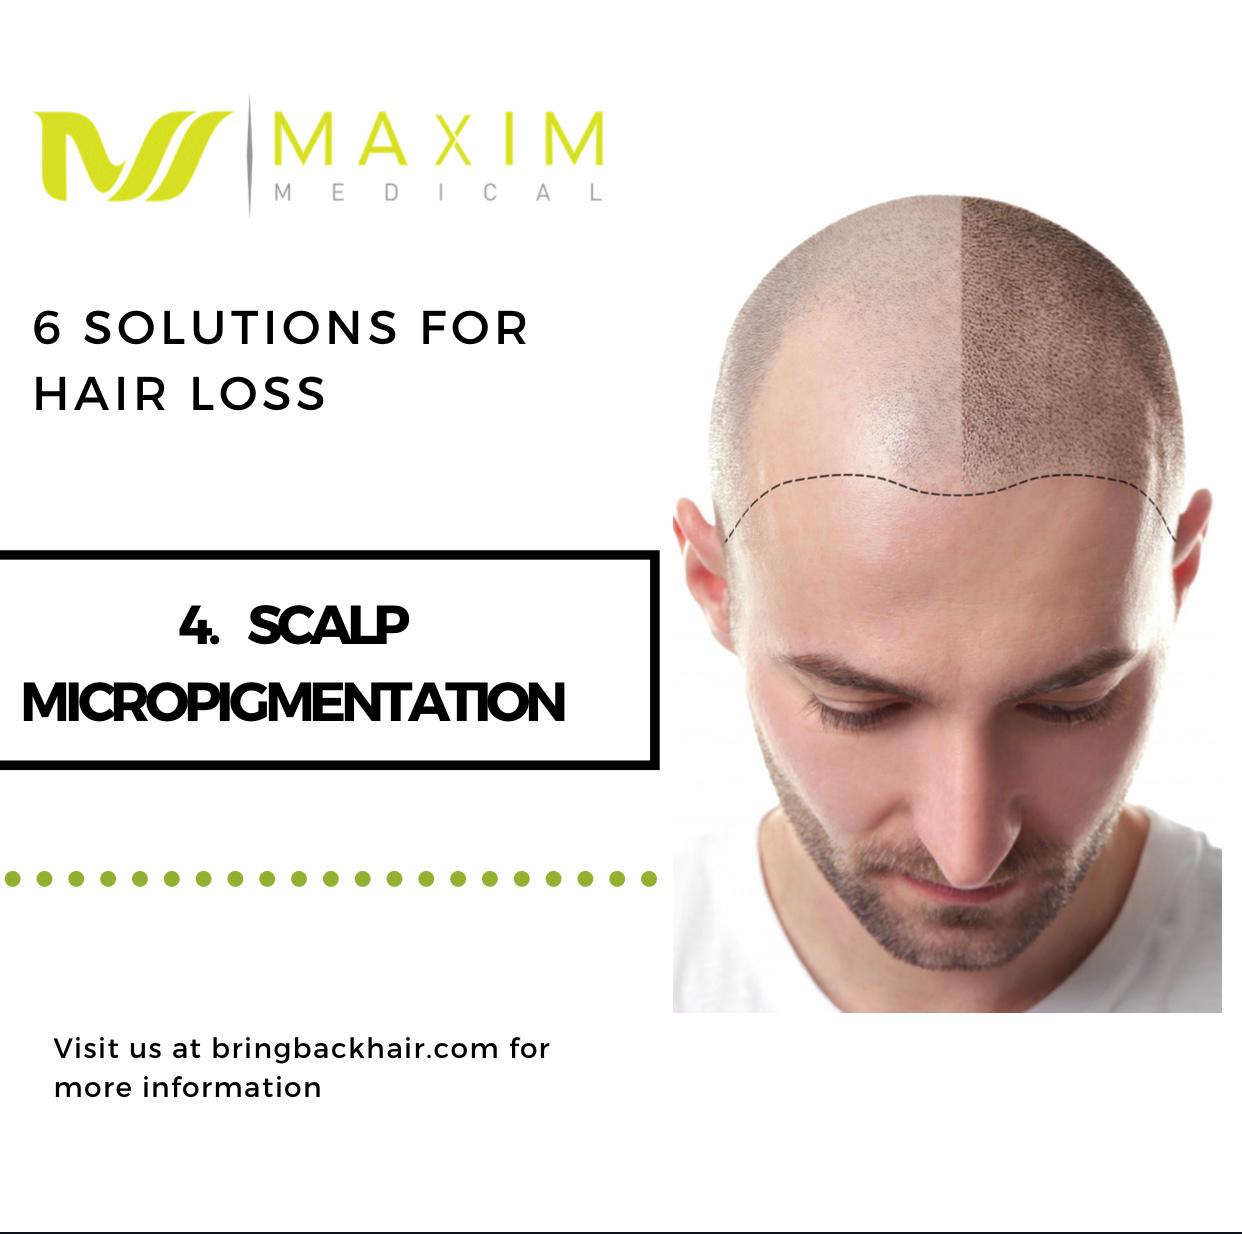 6 Solutions For Hair Loss

4. Scalp Micropigmentation
Scalp Micropigmentation (SMP) is another popular solution for hair loss. It is a non-invasive treatment that creates the appearance of tiny hair follicles, restoring the appearance of hair on a shaved scalp by creating the illusion of a thicker head of hair. The goal of SMP isn’t to create hairlike lines that are perfectly lined like microblading eyebrows, but instead to use tiny, layered dots in different hues of black to replicate the look of a shadow on your scalp. This style, referred to as pointillism, is done to create natural-looking depth and definition. It is also a great option when all you want is to add density to your hair.

Full article on our website: